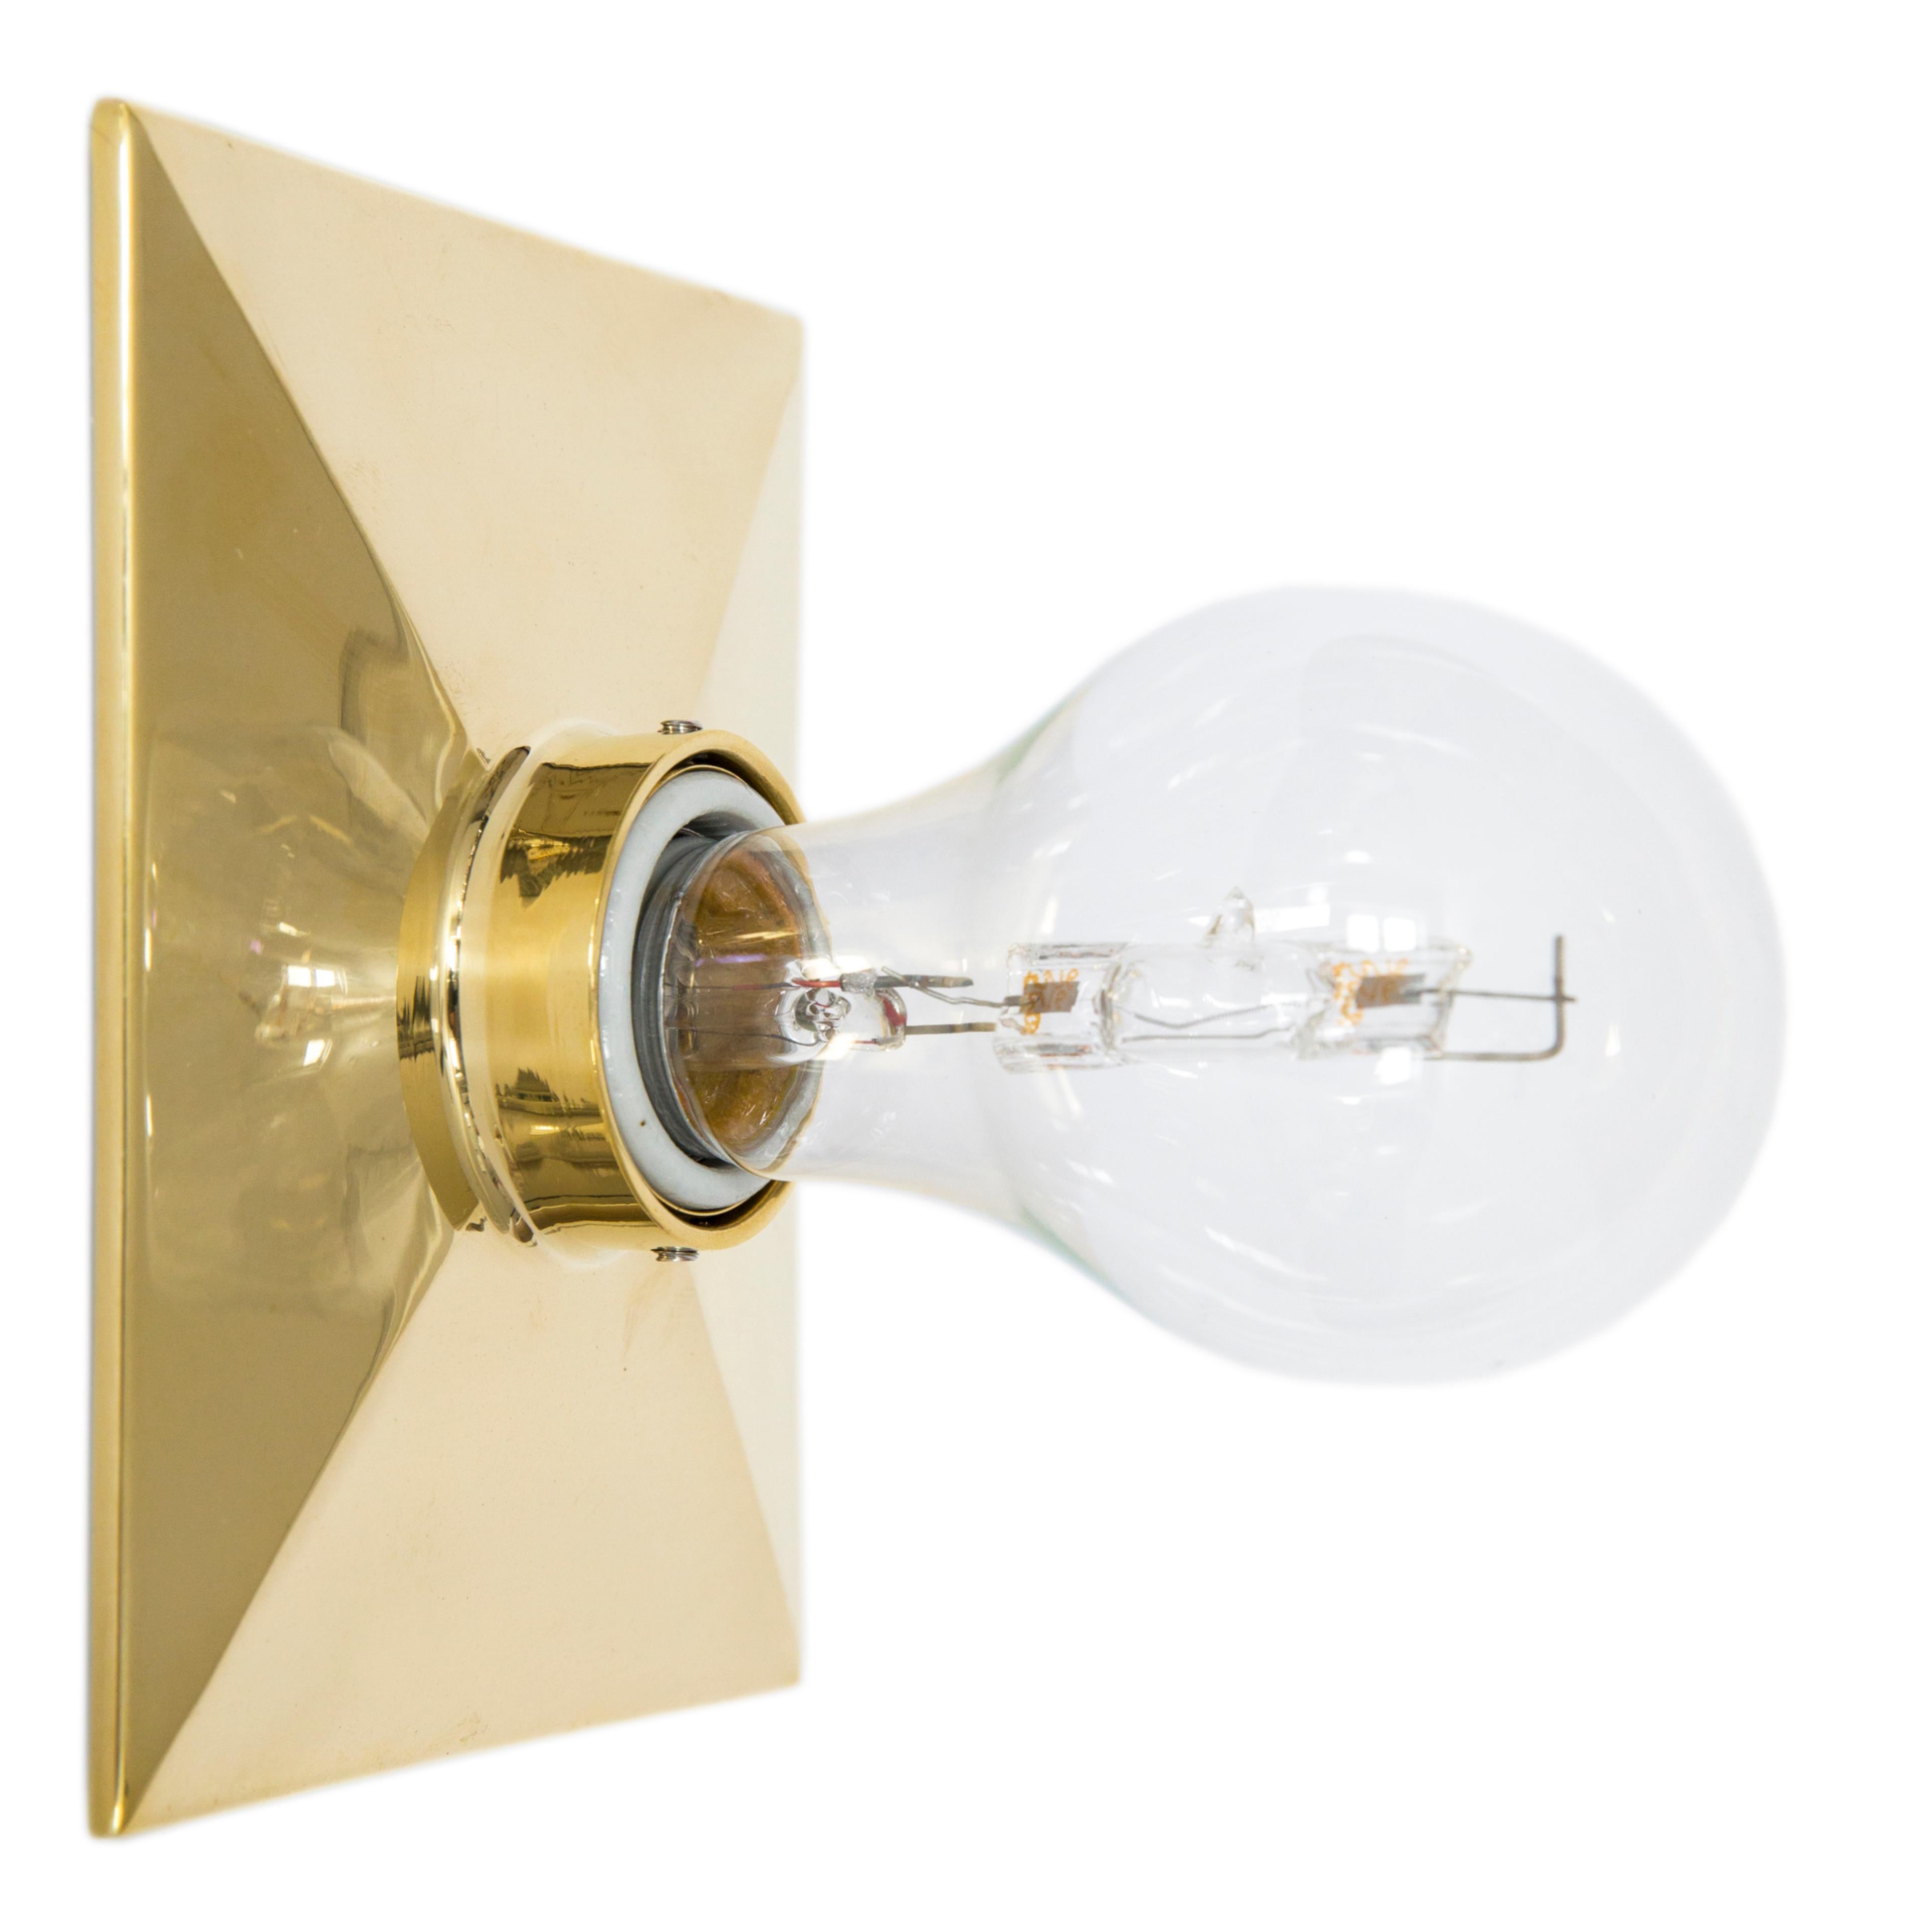 The vica light is a rectangular cast metal escutcheon plate with a beveled edge design and porcelain socket. The fixture can be wall or ceiling mounted. 

The maximum wattage bulb recommended is 60W. The Vica Light is UL listed.

Handcrafted in